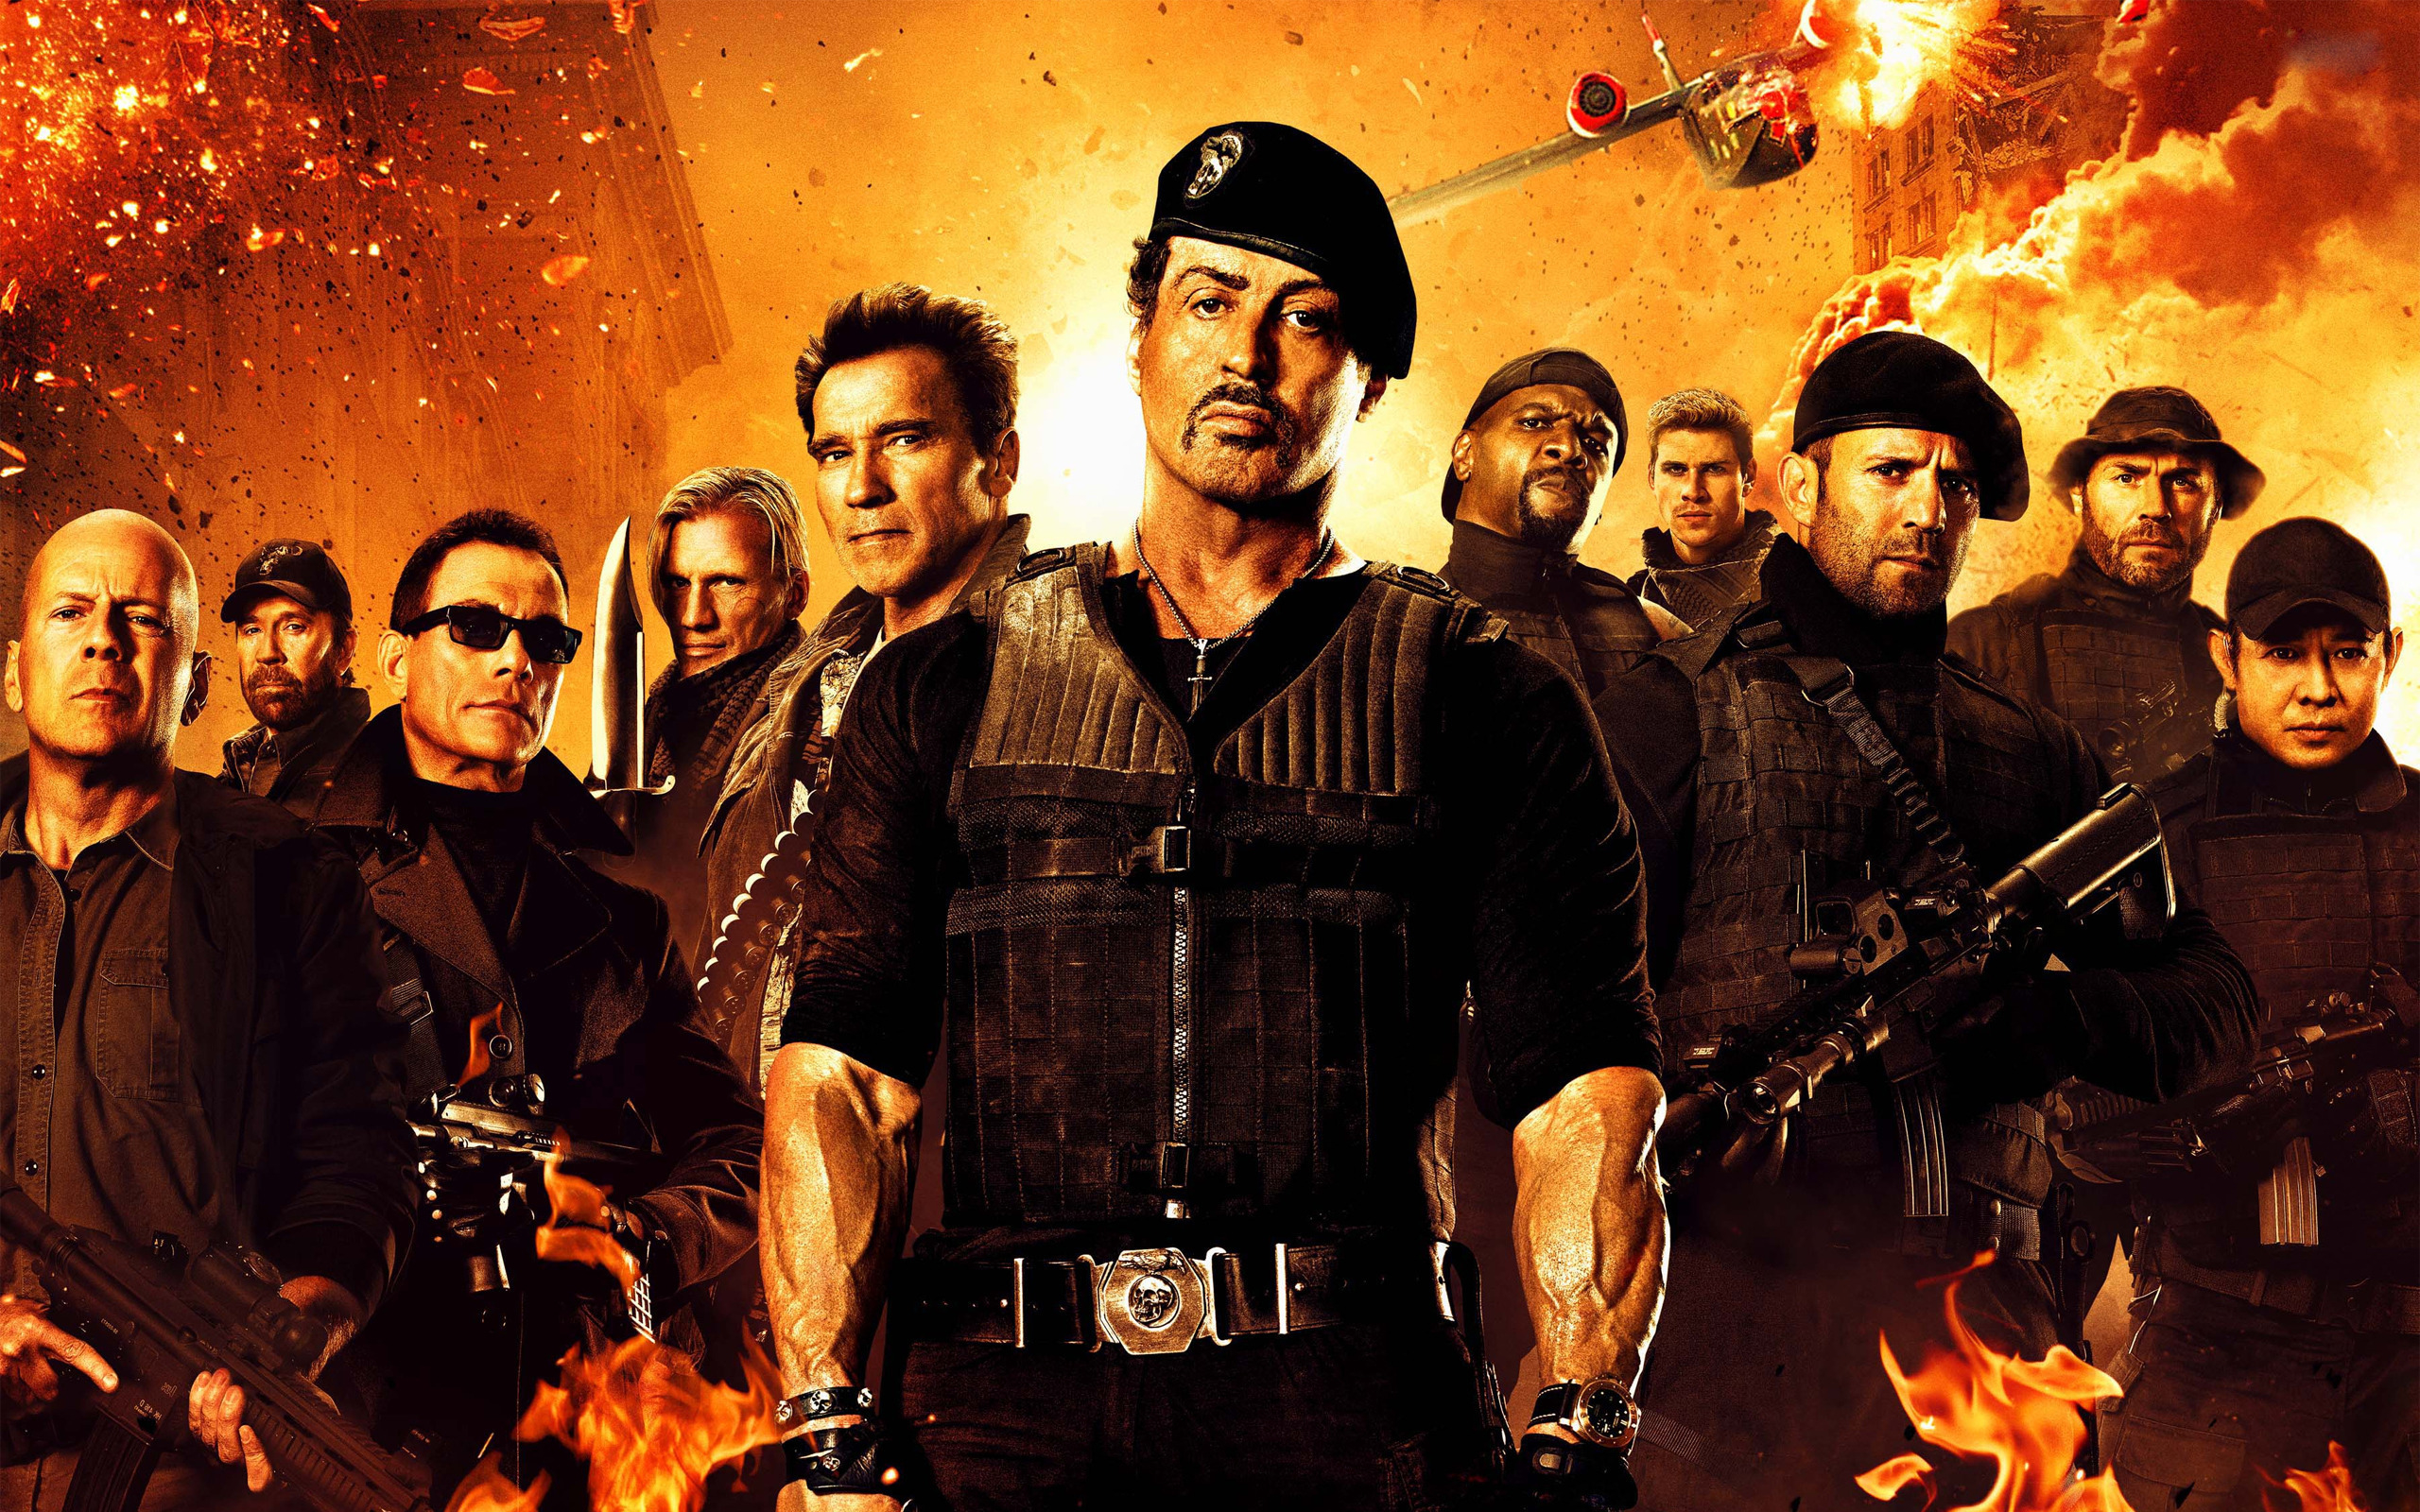 movie, the expendables 2, arnold schwarzenegger, barney ross, billy (the expendables), booker (the expendables), bruce willis, chuck norris, church (the expendables), dolph lundgren, gunnar jensen, hale caesar, jason statham, jean claude van damme, jet li, lee christmas, liam hemsworth, randy couture, sylvester stallone, terry crews, toll road, trench (the expendables), vilain (the expendables), yin yang (the expendables), the expendables images